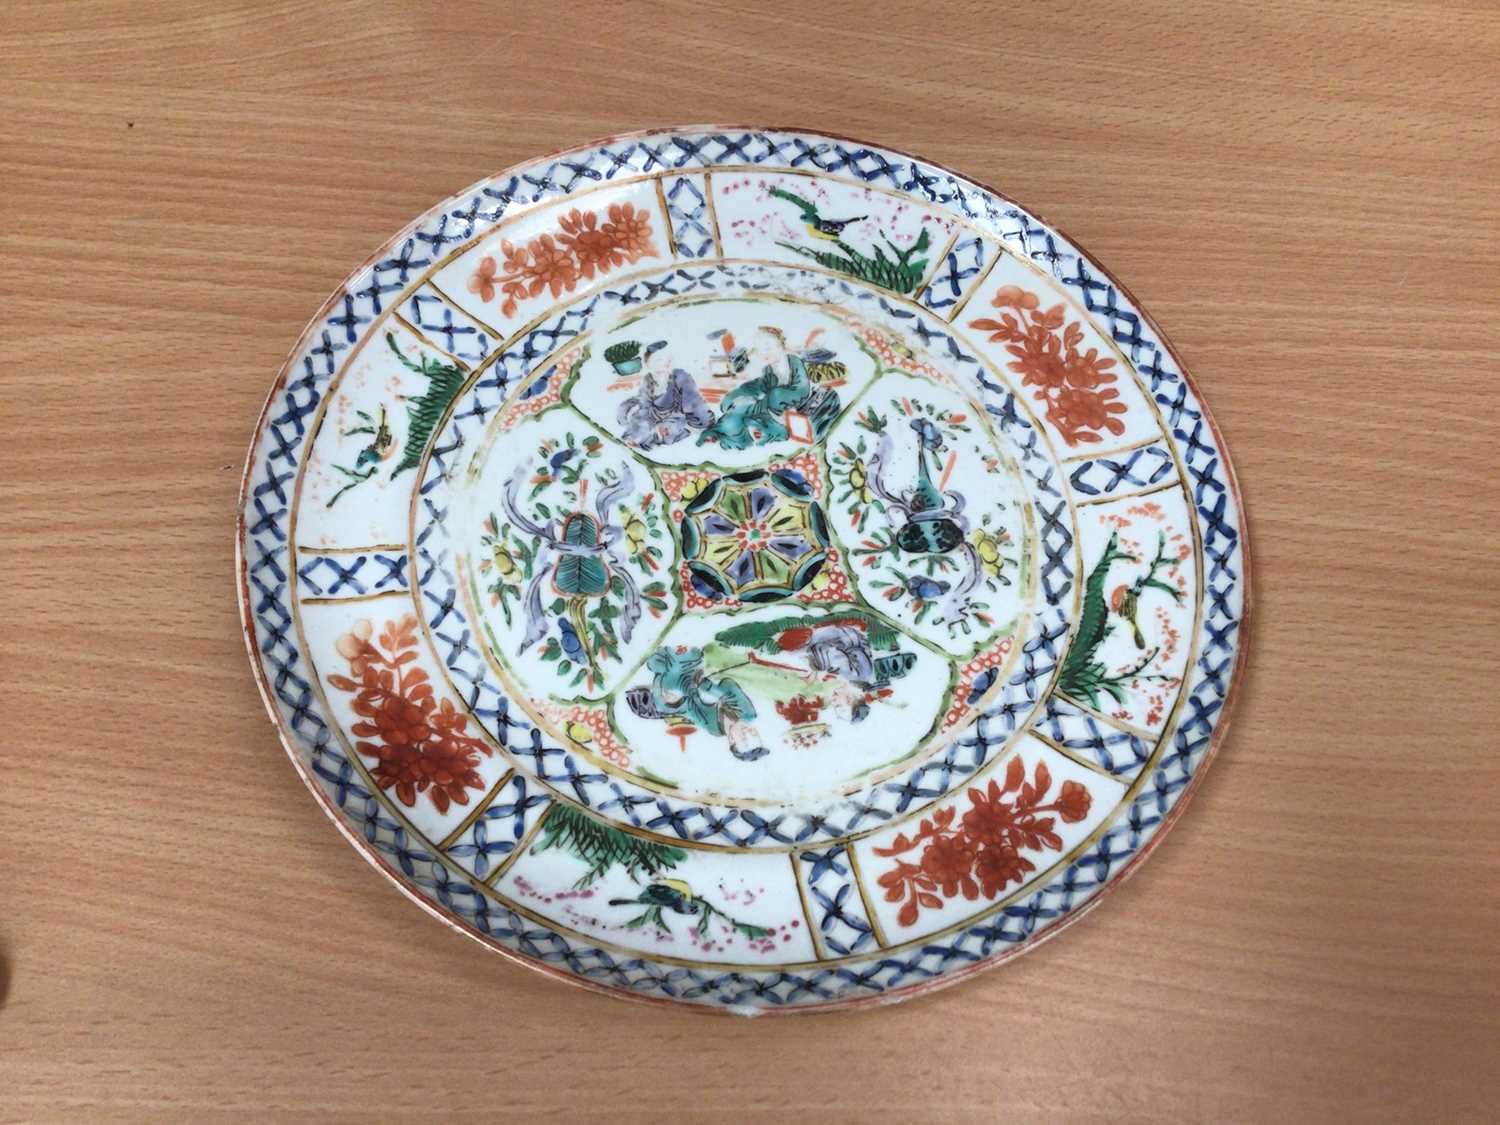 Six 19th century Chinese polychrome porcelain plates decorated with figures, birds and flowers - Image 12 of 12